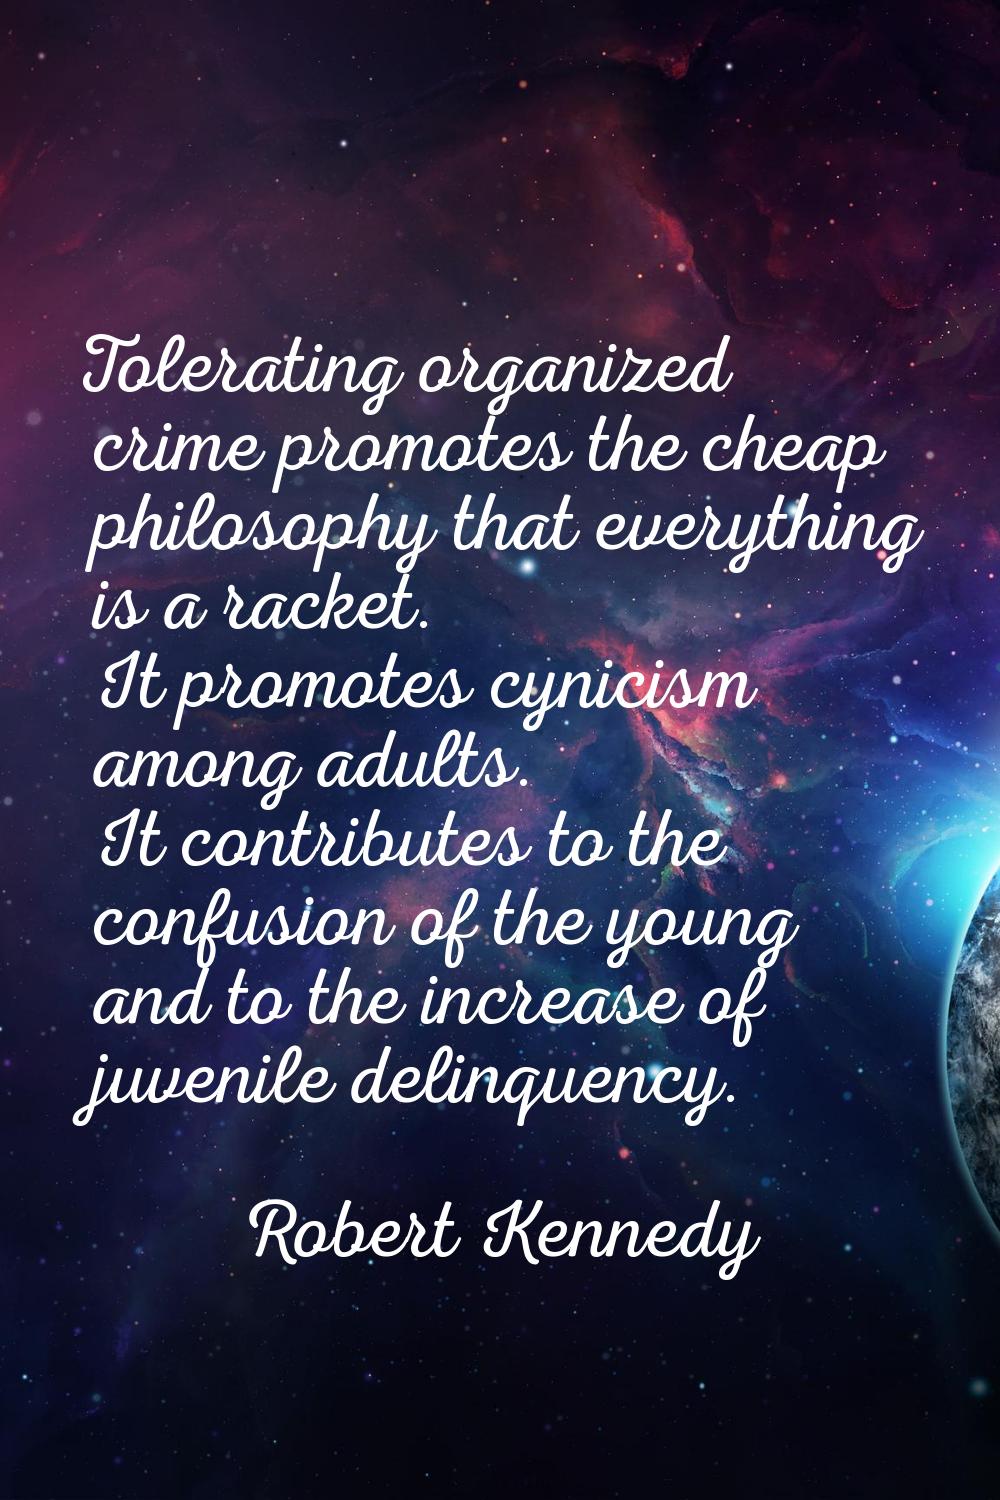 Tolerating organized crime promotes the cheap philosophy that everything is a racket. It promotes c